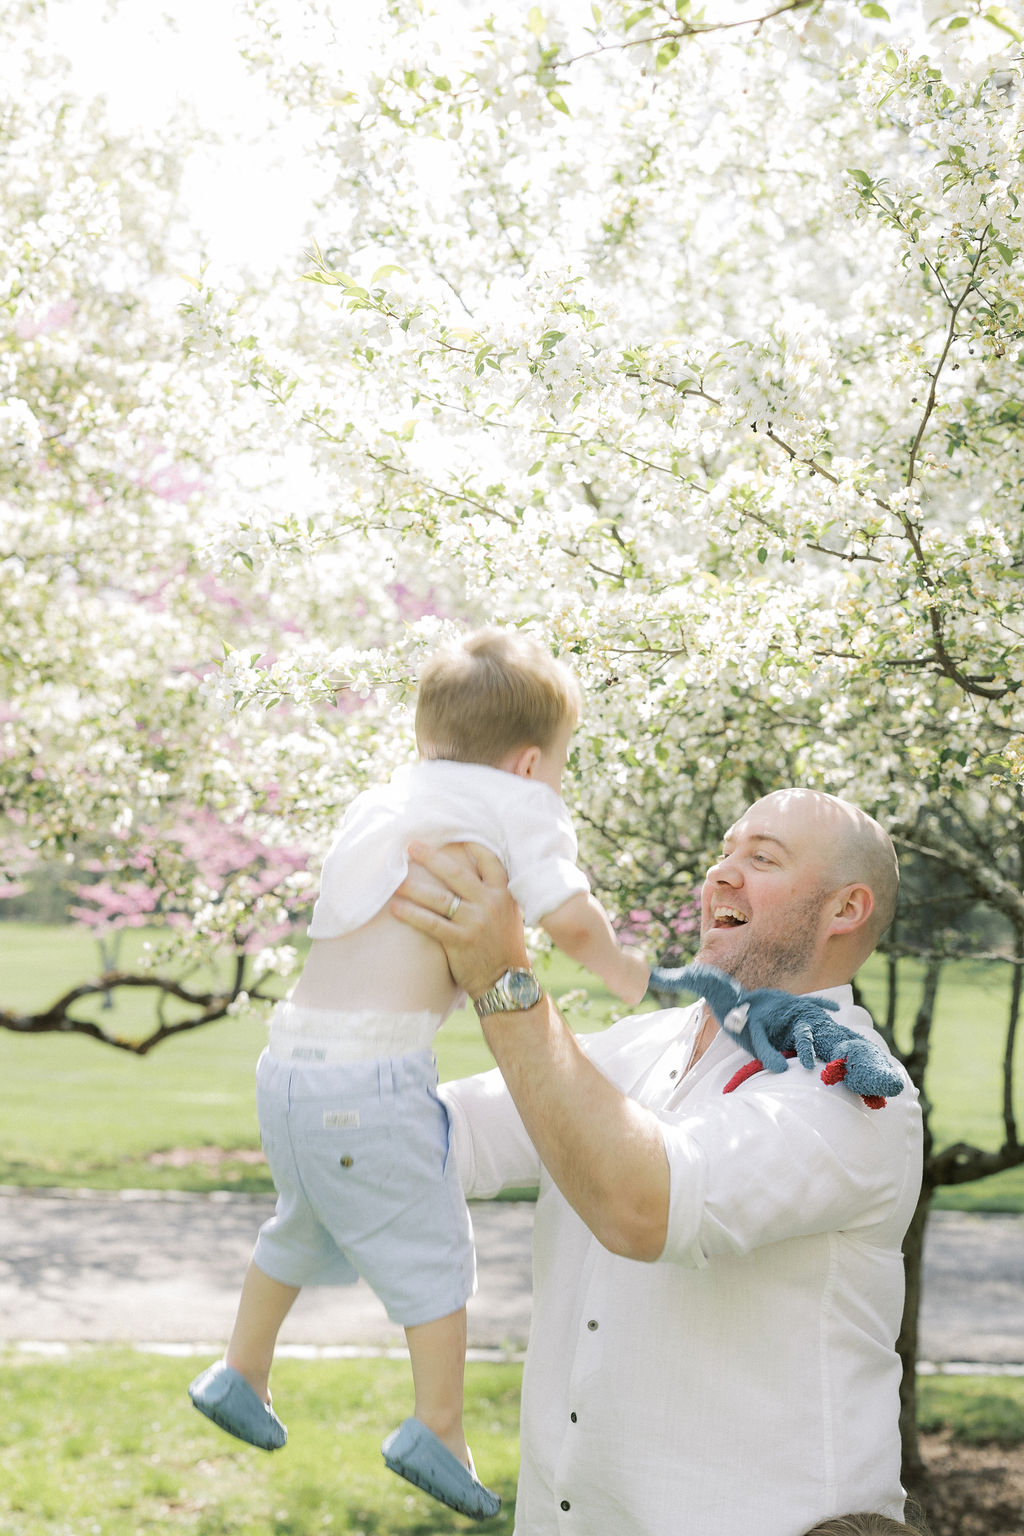 A happy dad lifts and plays with his toddler son in a park full of blooming trees